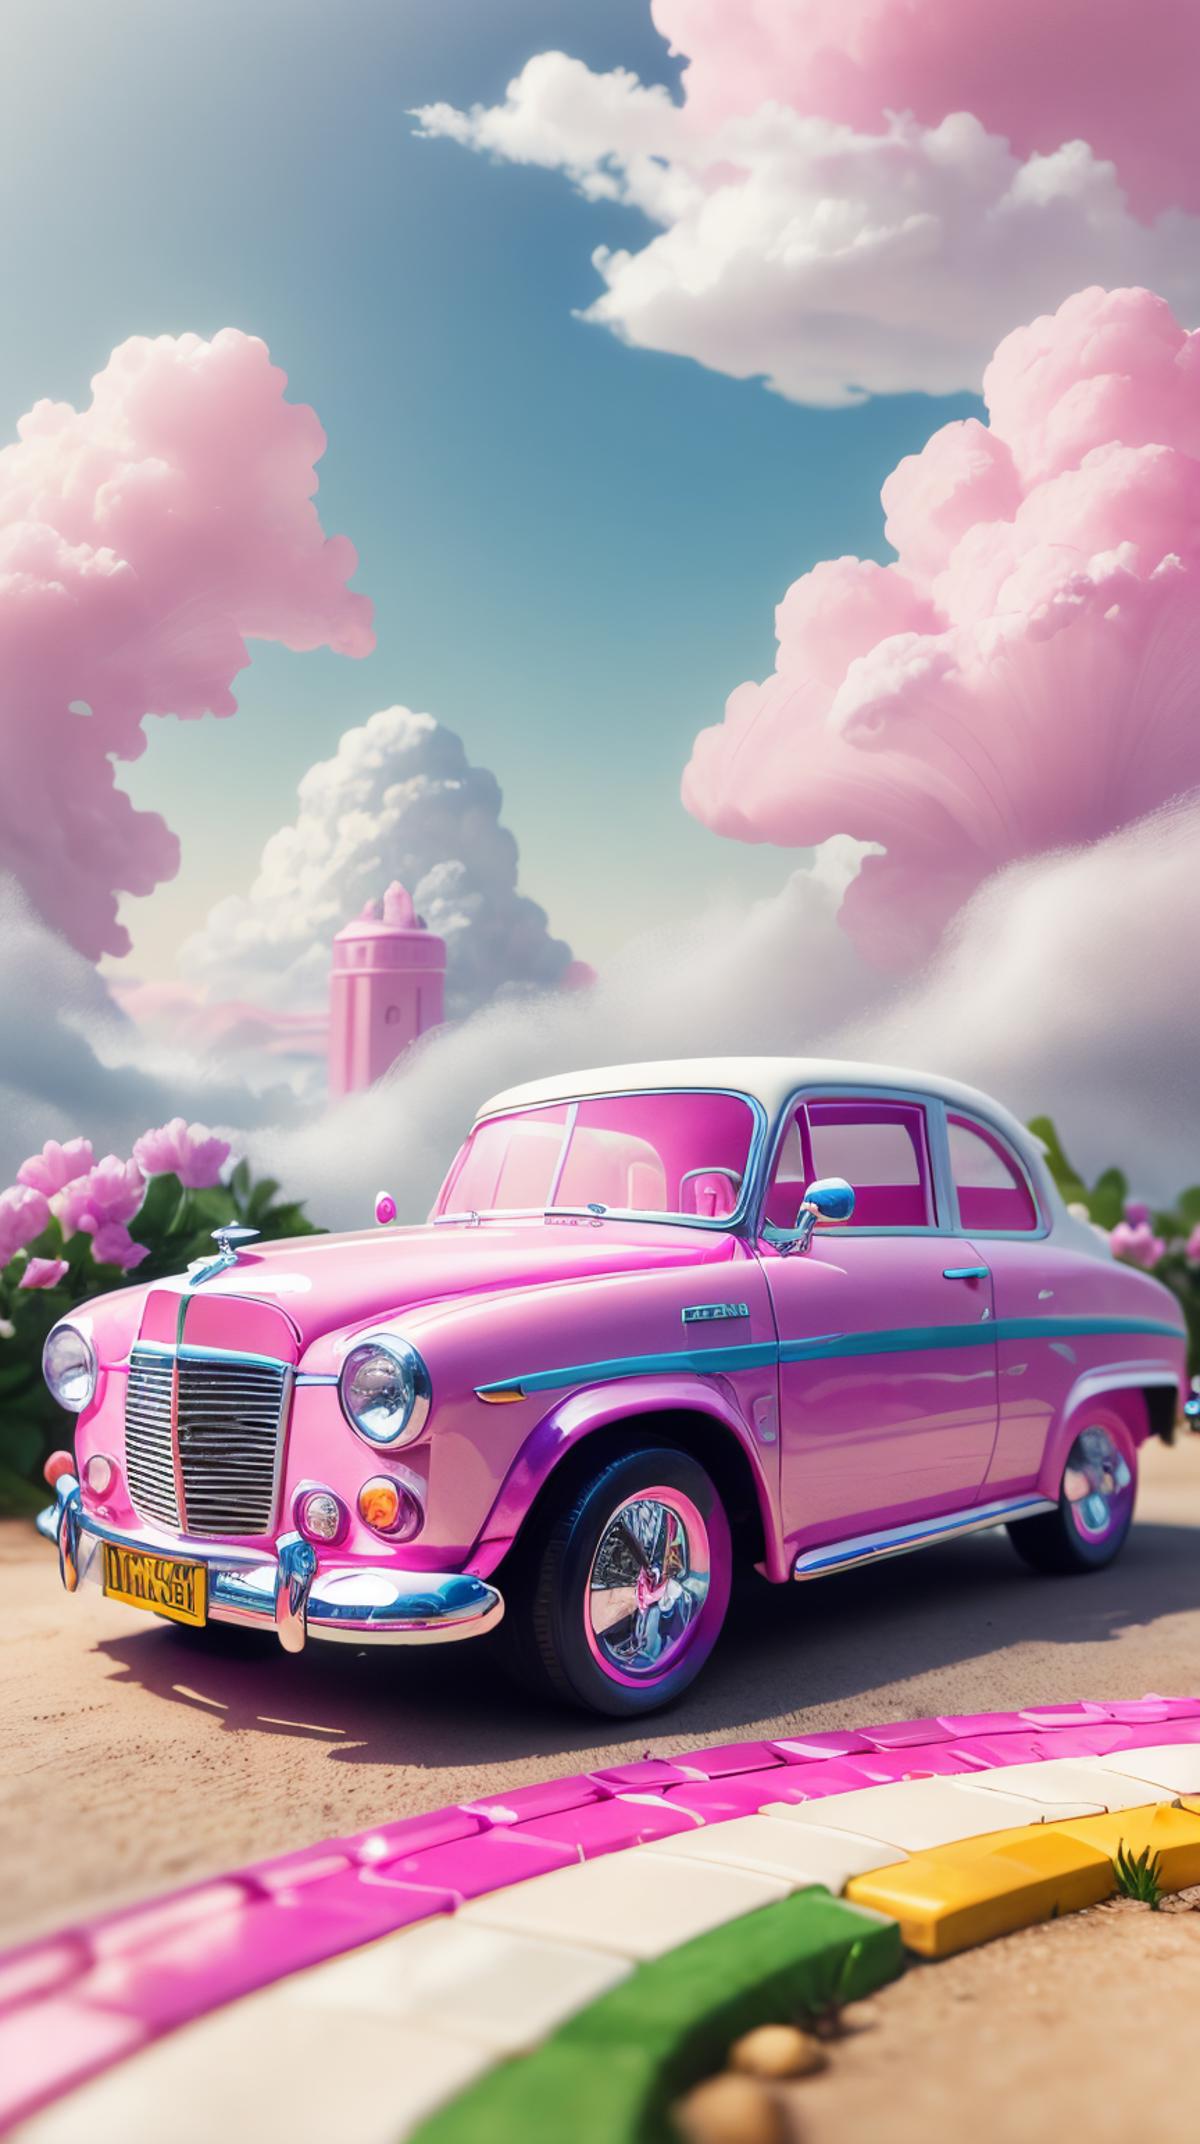 Pink and White Car with Pink Flowers in the Background